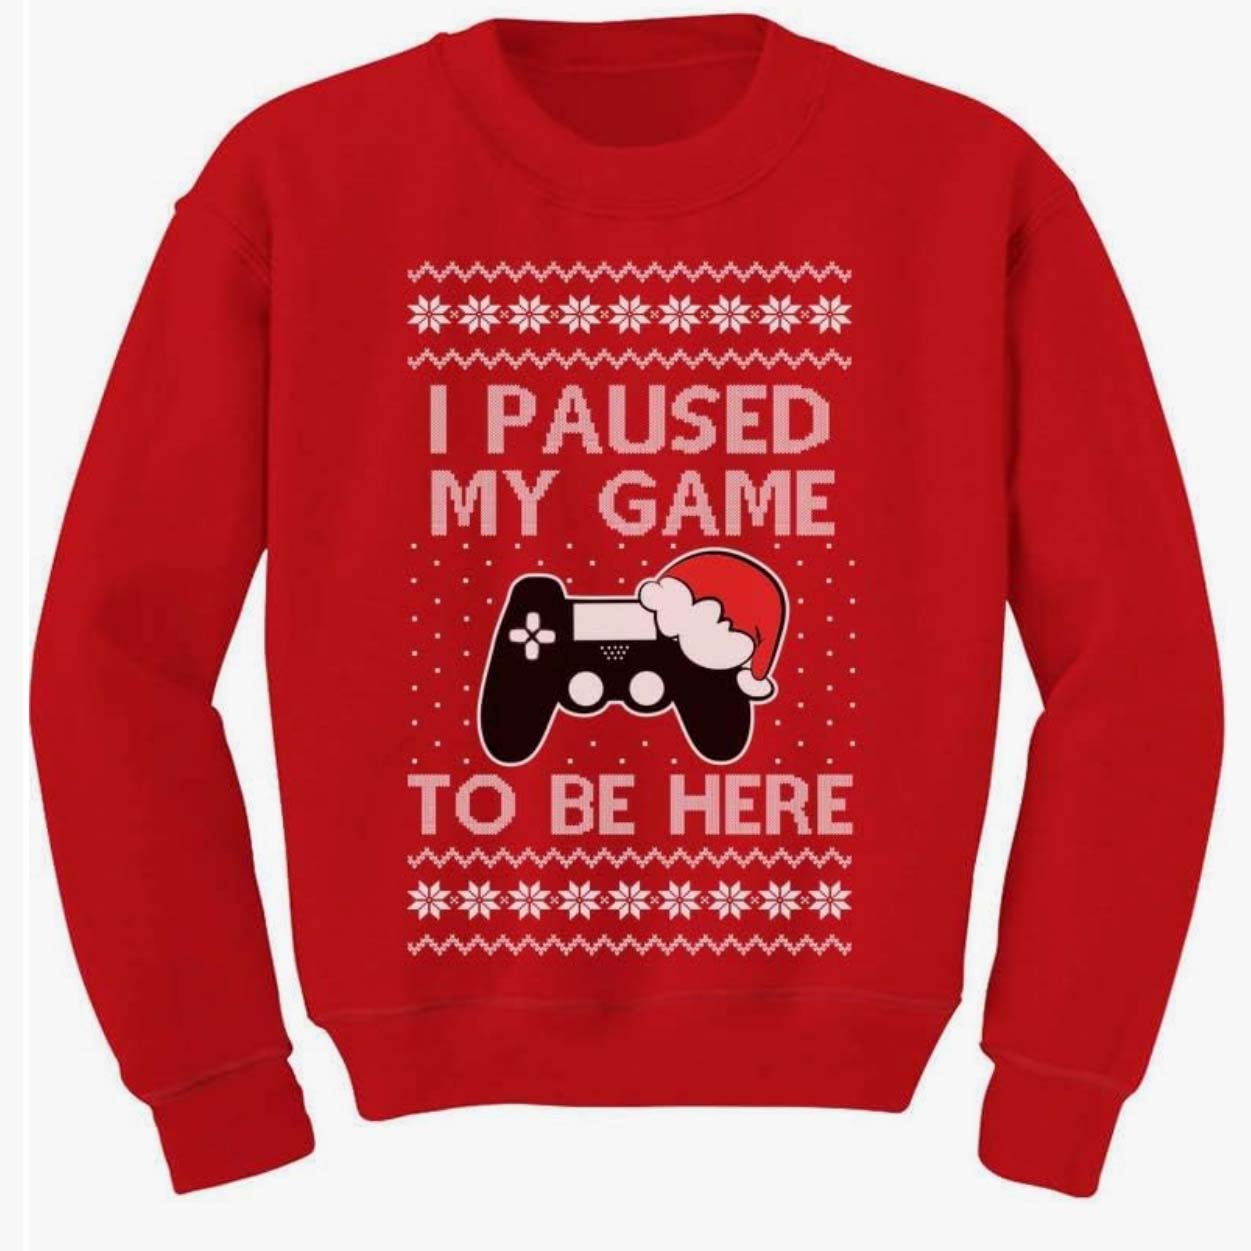 Red sweater with game console and santa hat